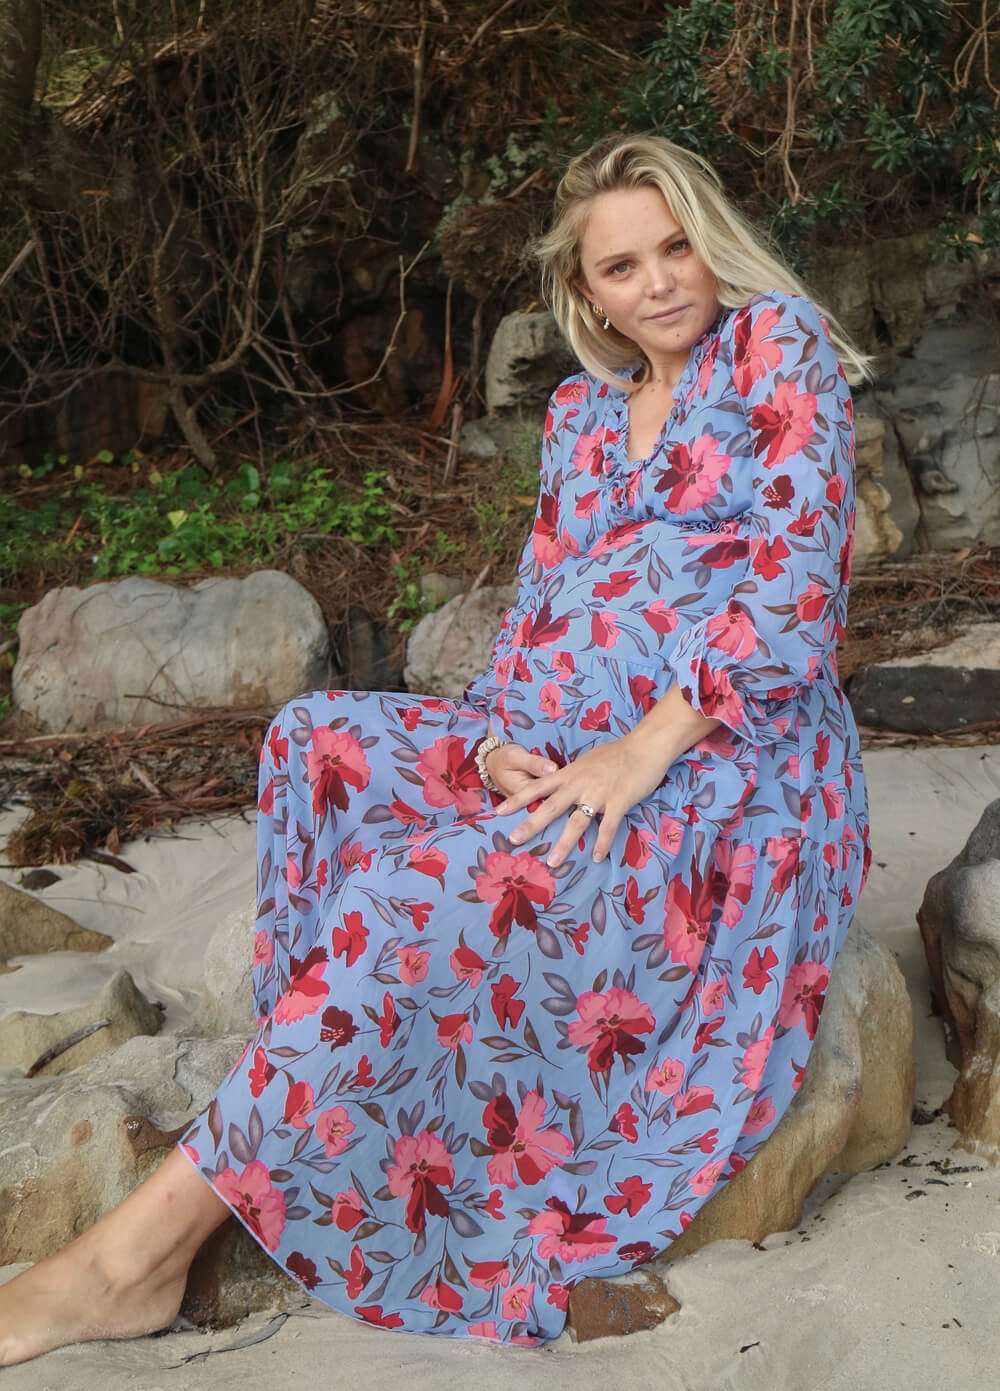 Lait & Co - Wanderlust Maternity Maxi Gown in Blue/Red Floral